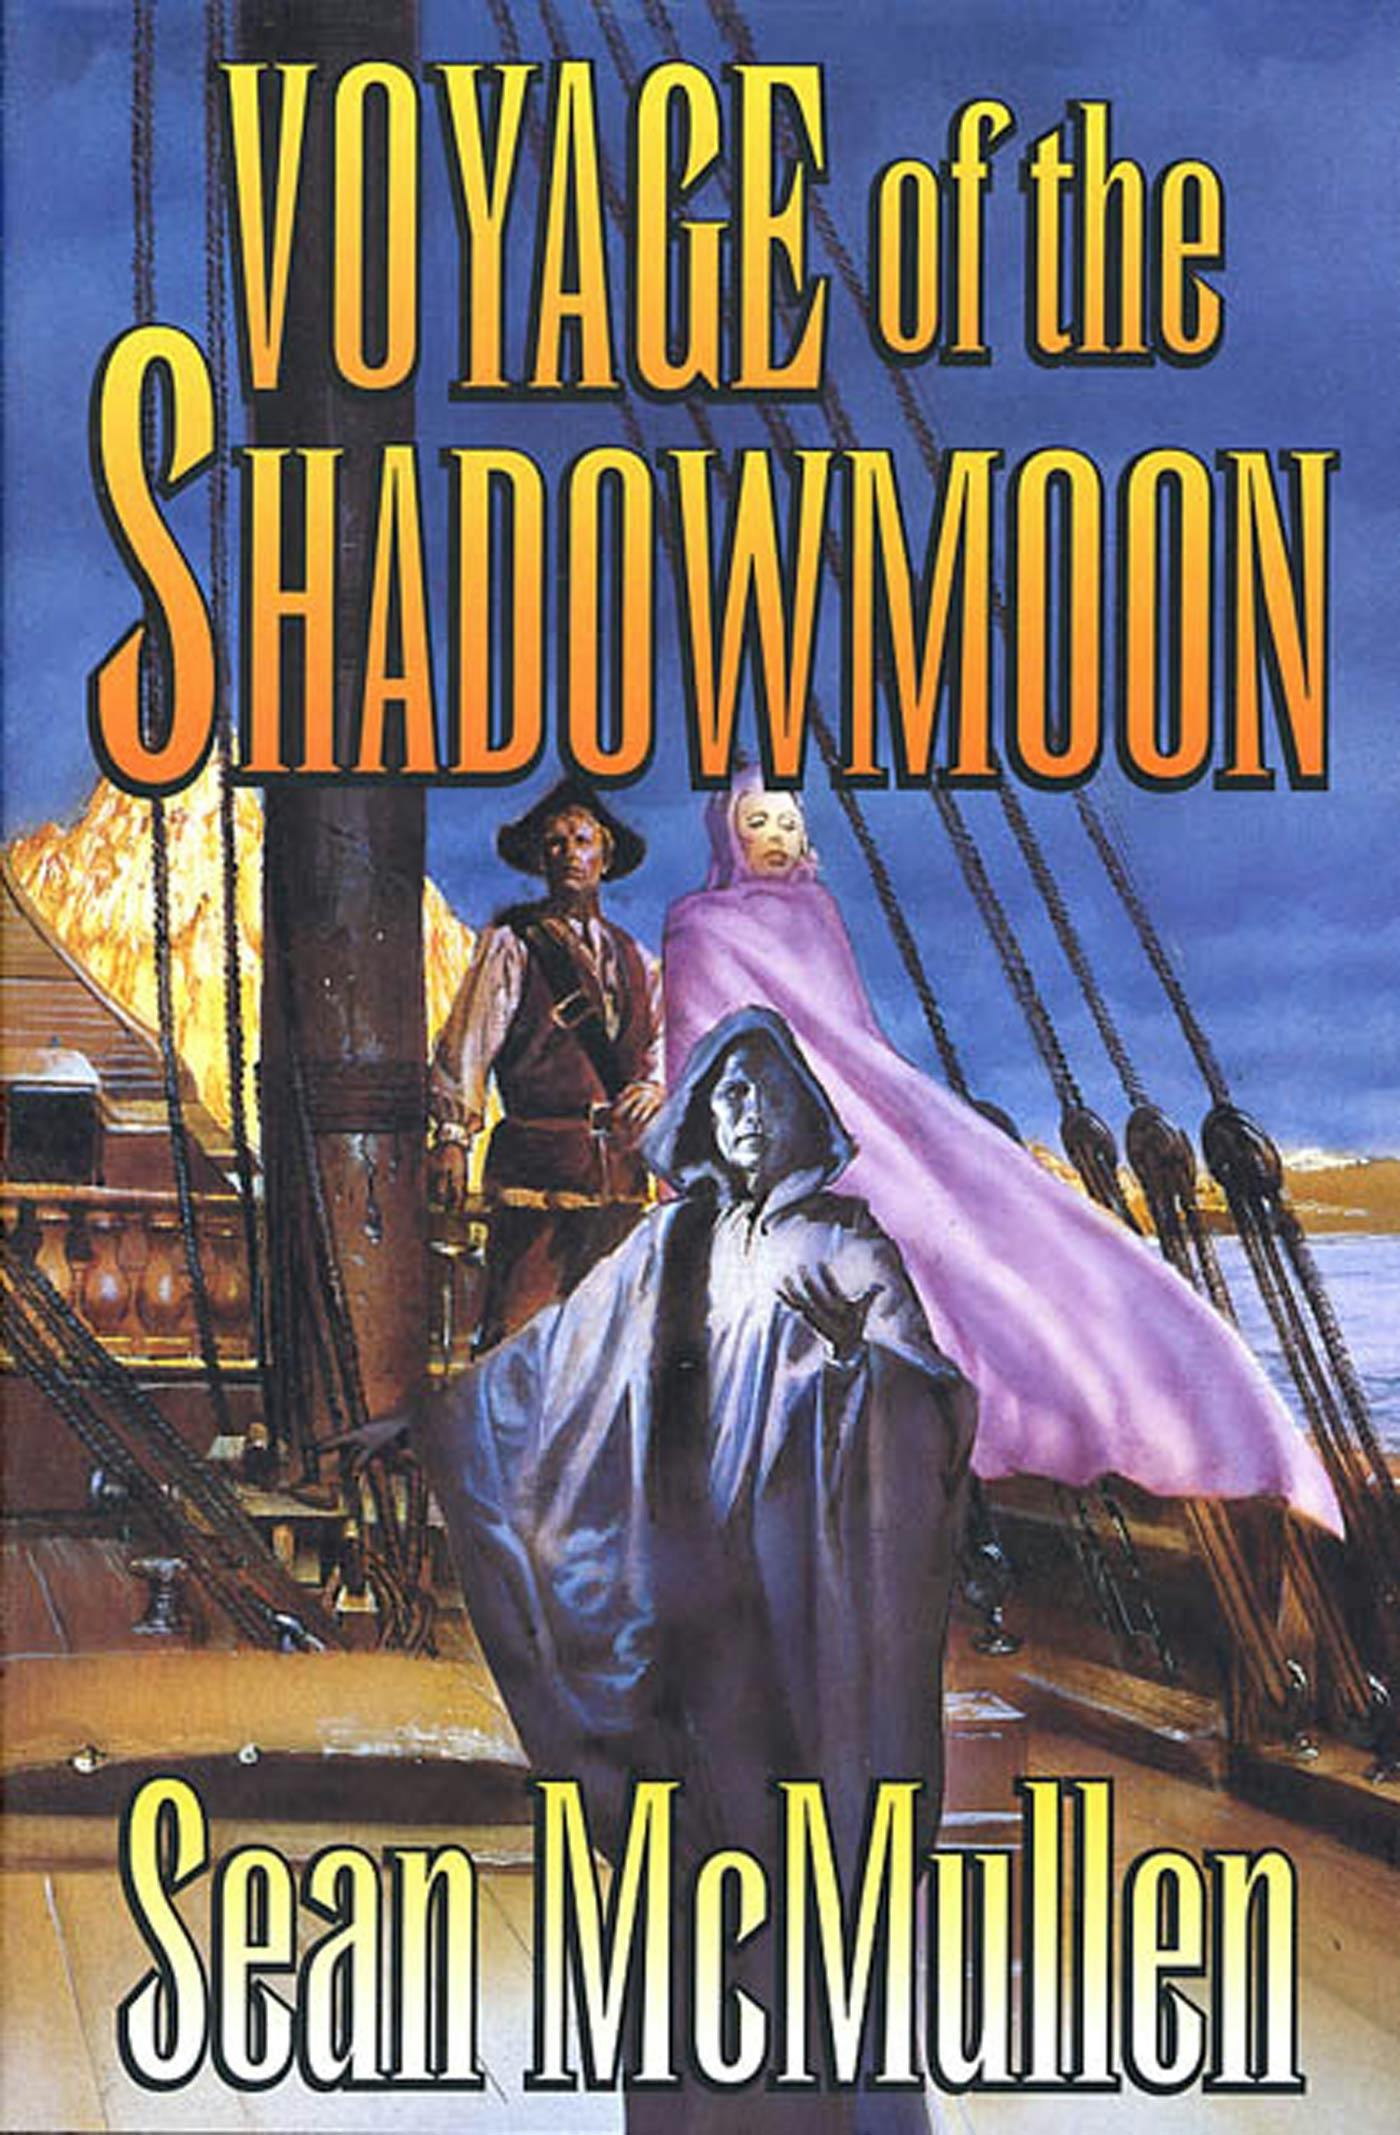 Cover for the book titled as: Voyage of the Shadowmoon